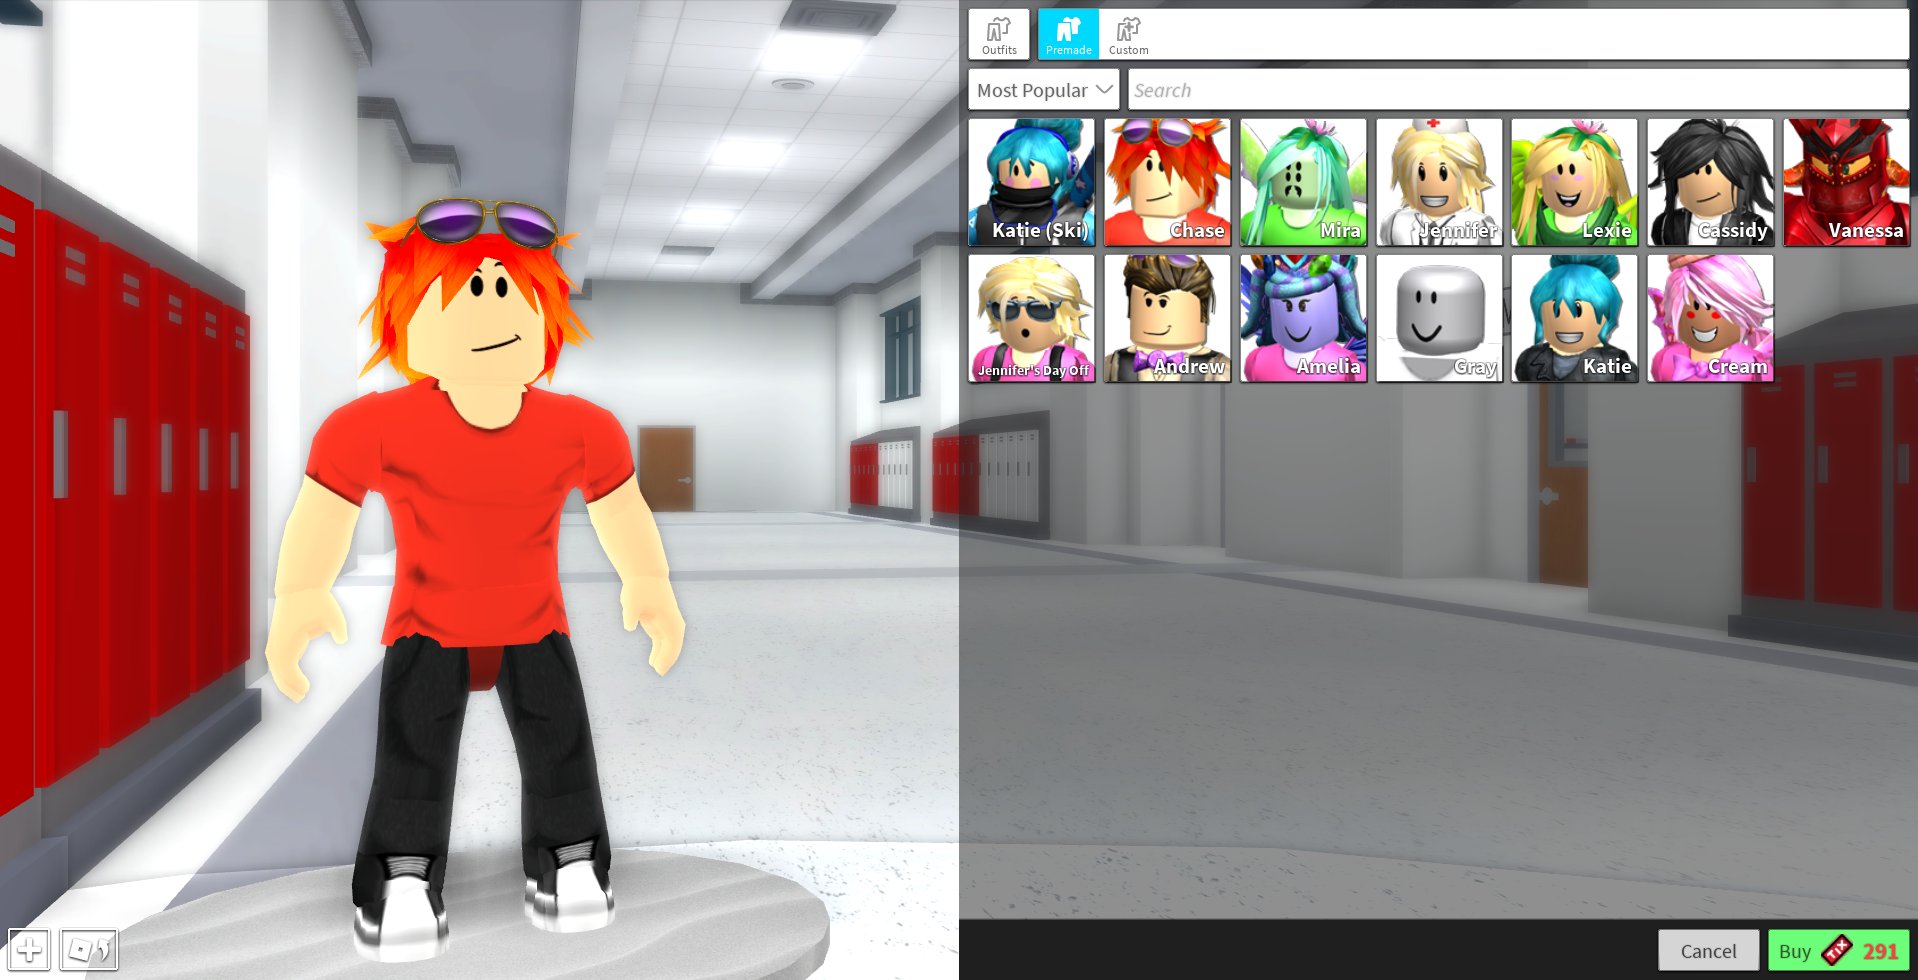 Robloxian Highschool On Twitter Here Are Some More Preview Images Of Our Brand New Editor Made By Sharksieforreal